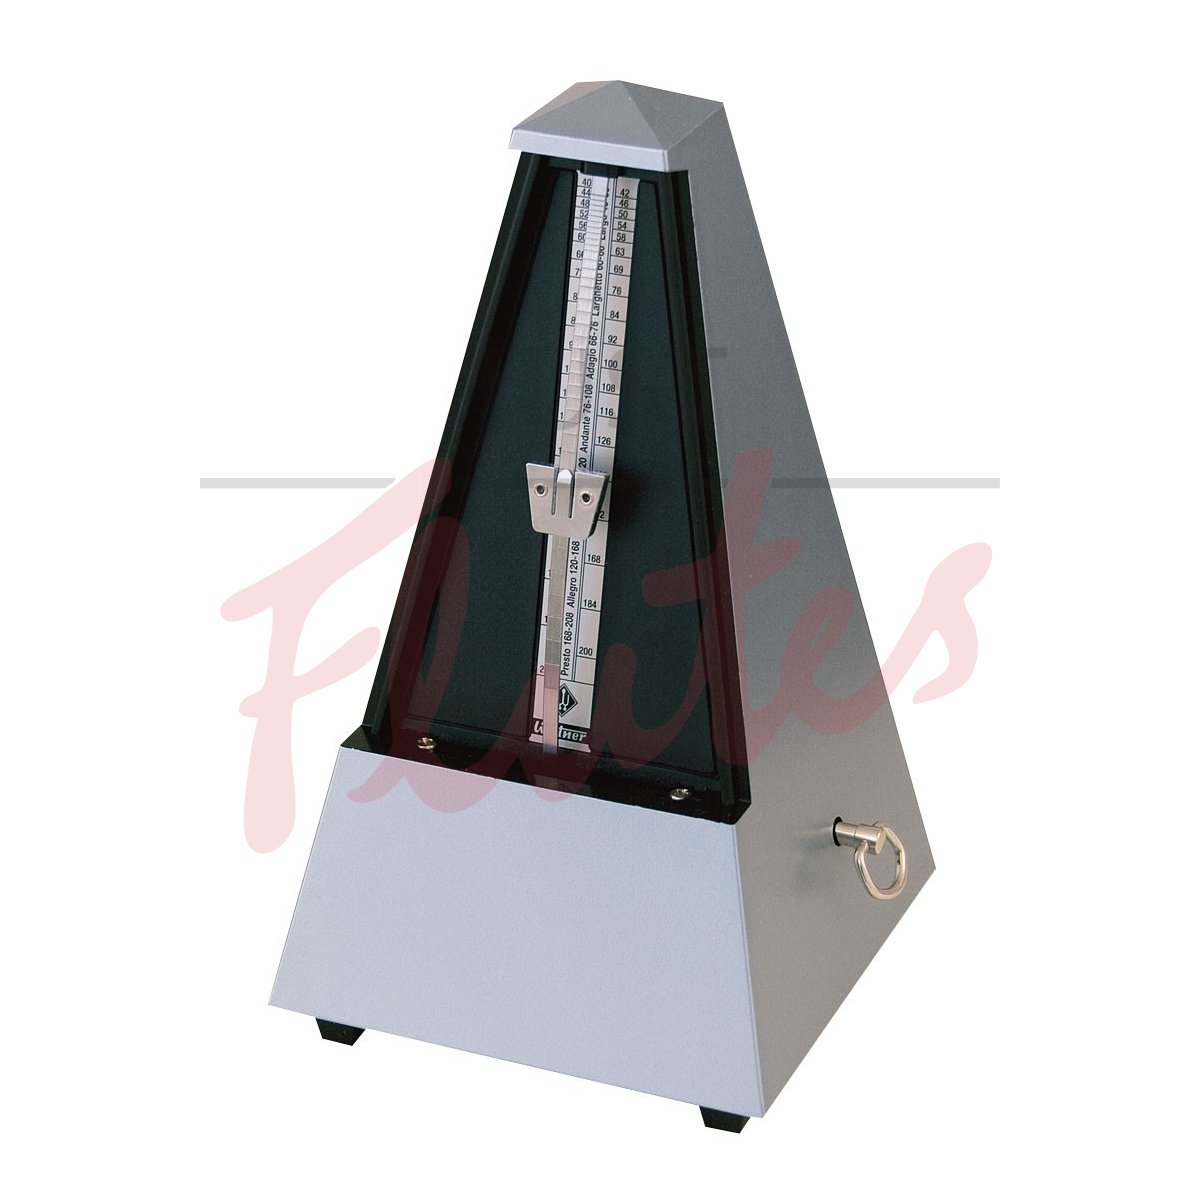 Wittner 855203 Plastic Pyramid Metronome with Bell, Silver Finish